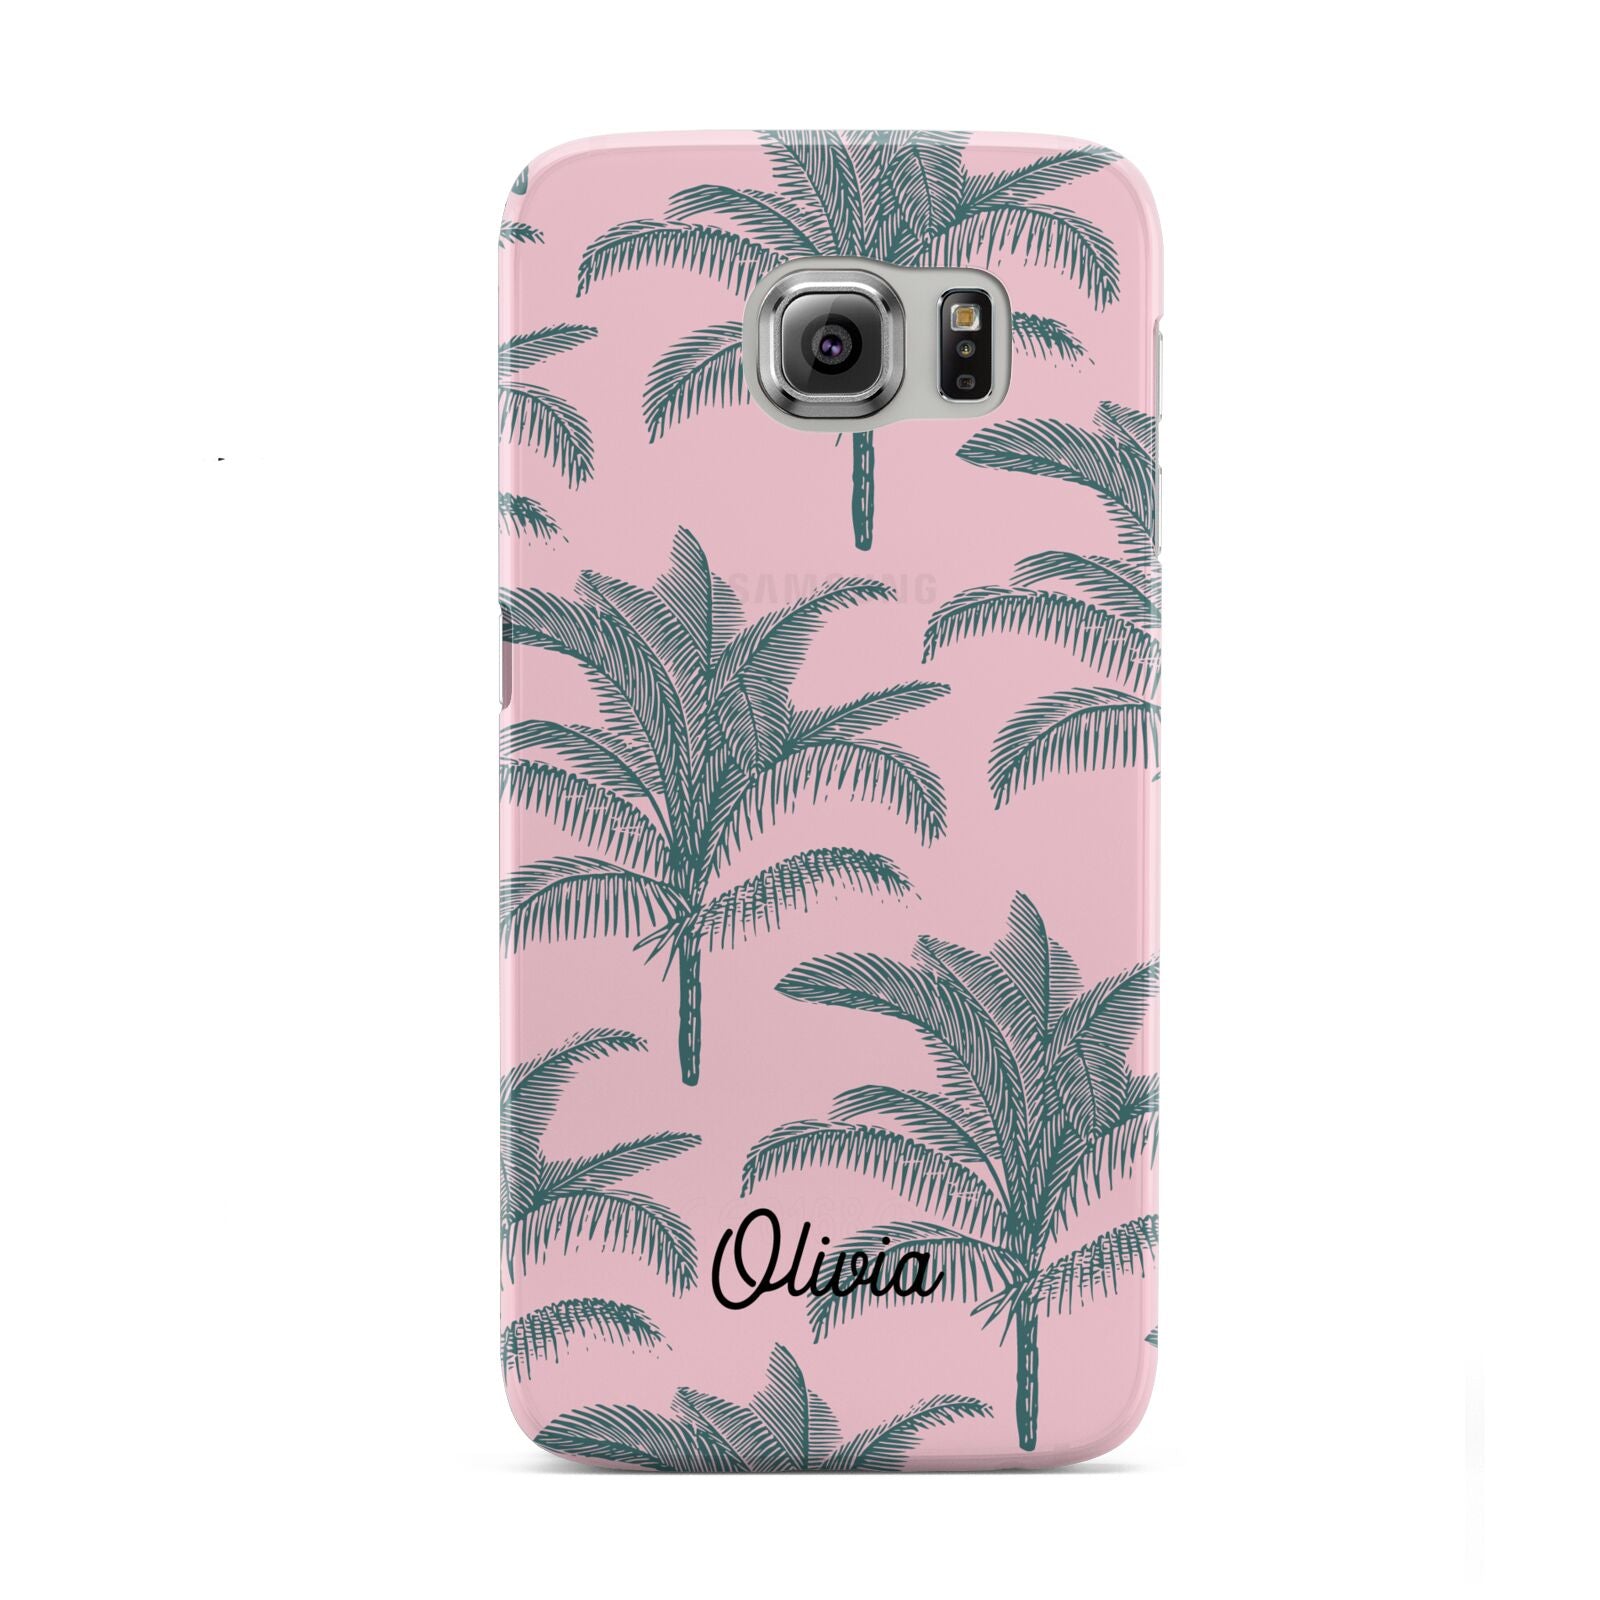 Personalised Palm Samsung Galaxy S6 Case